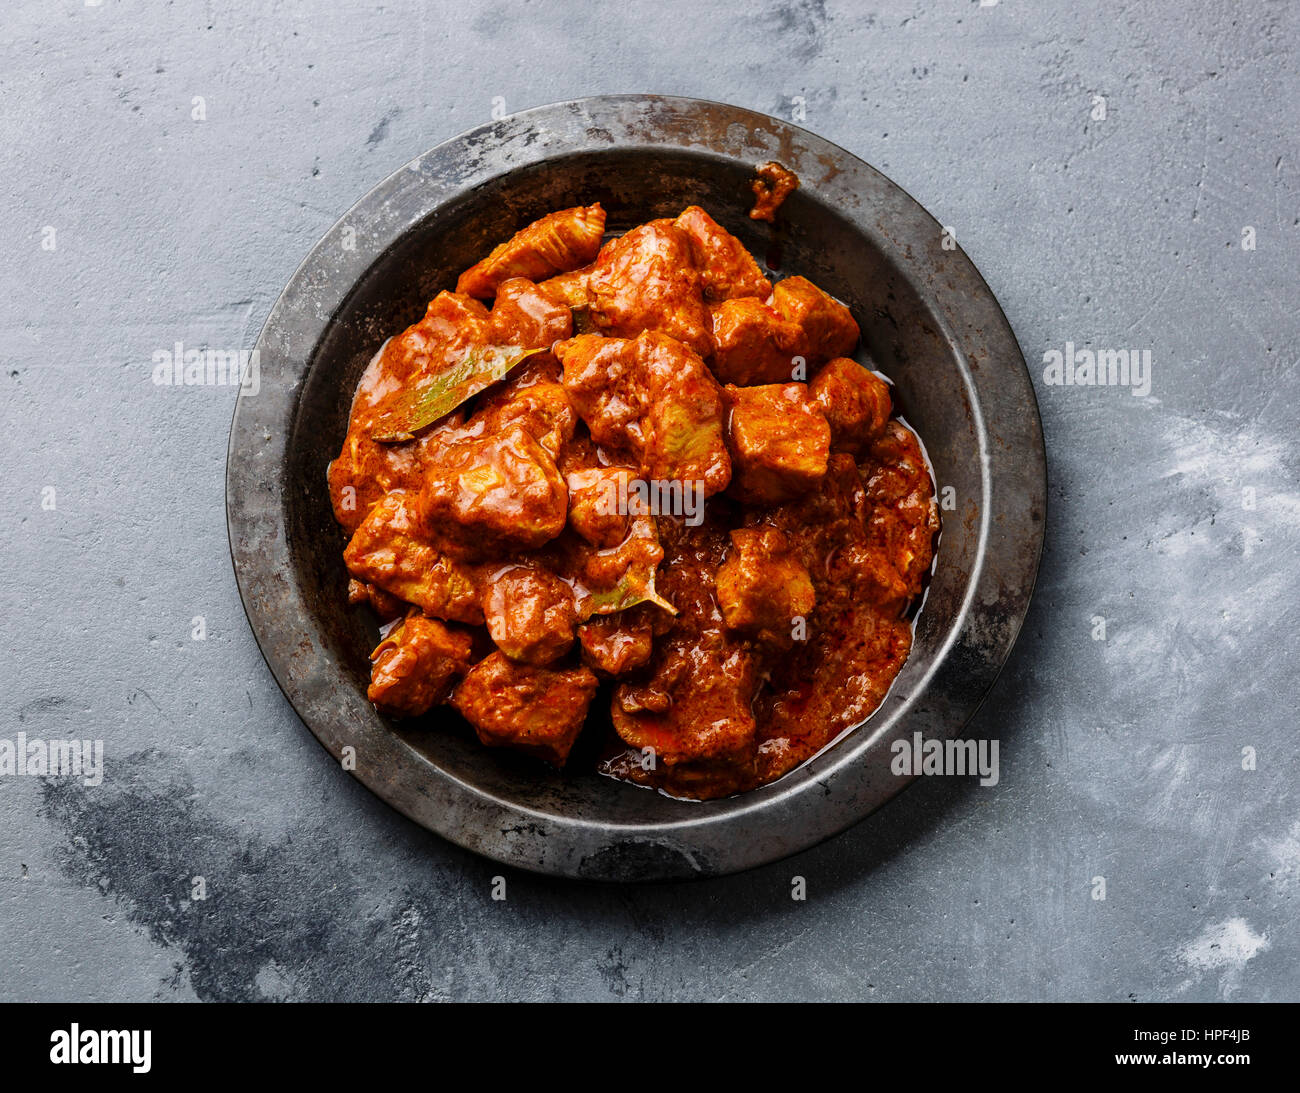 Chicken tikka masala spicy curry meat food in metal plate close-up Stock Photo